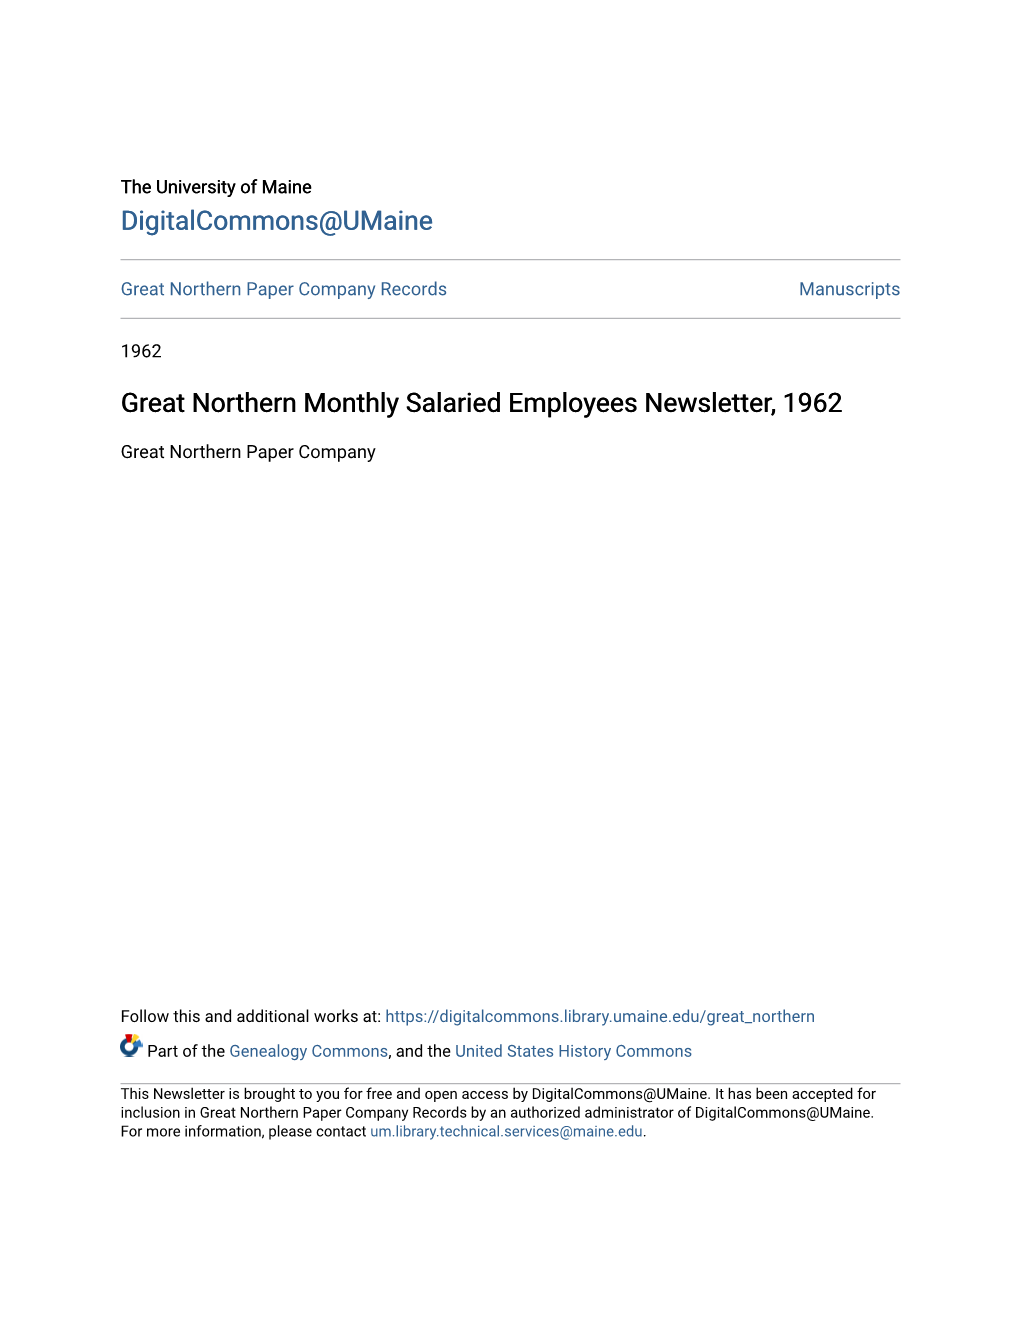 Great Northern Monthly Salaried Employees Newsletter, 1962